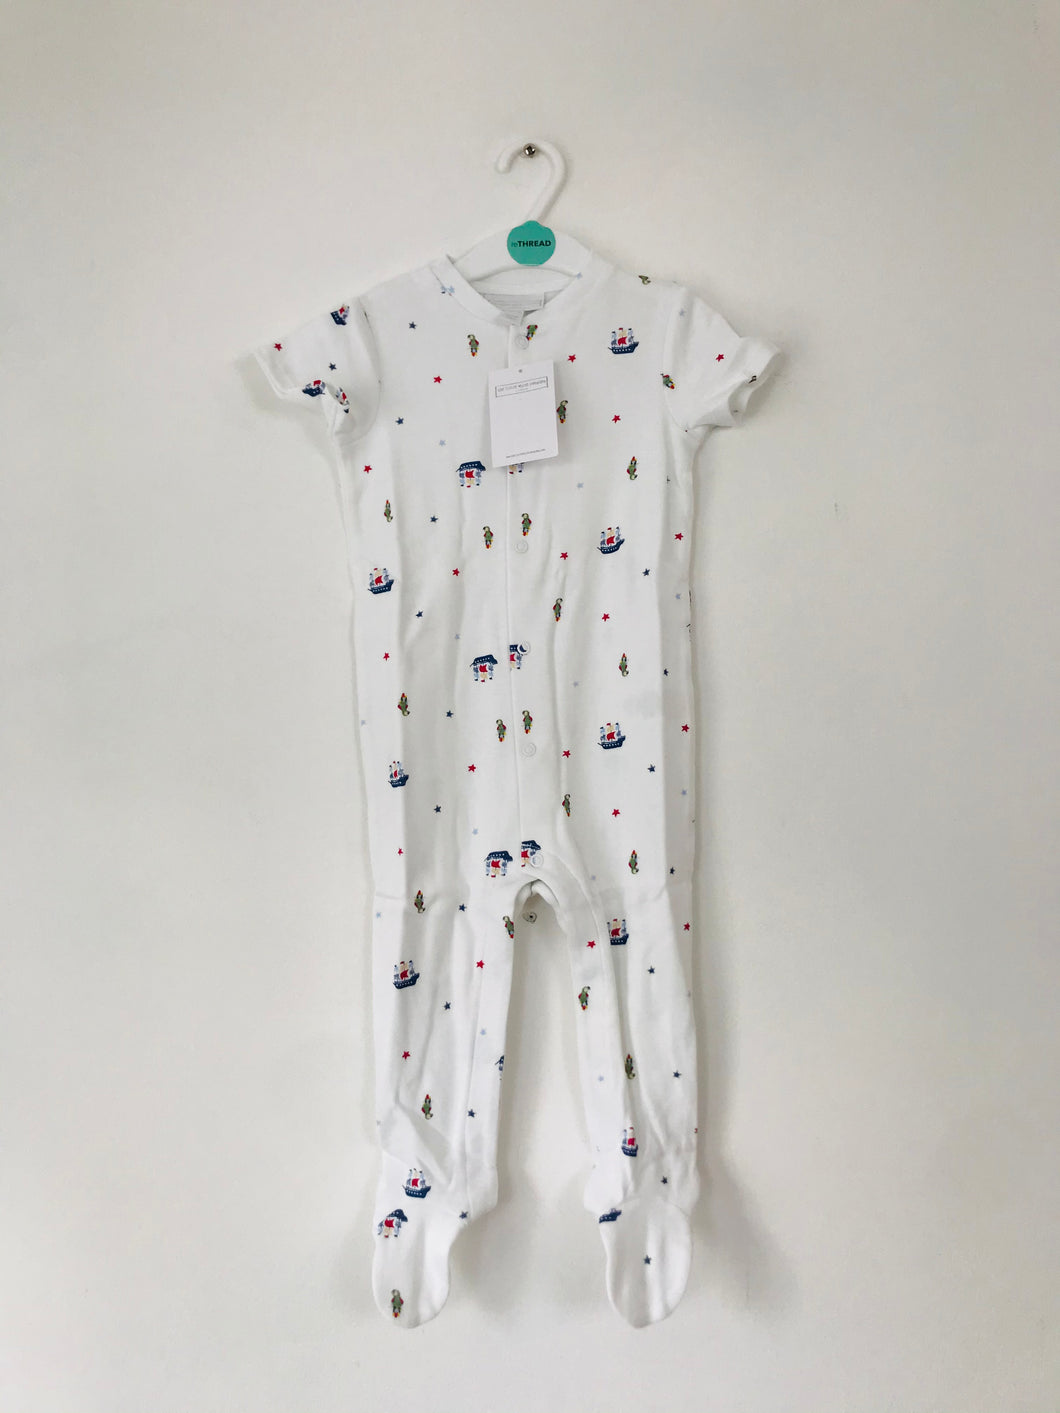 The Little White Company NWT Kids Footsie Jumpsuit Playsuit | 12-18 months | White